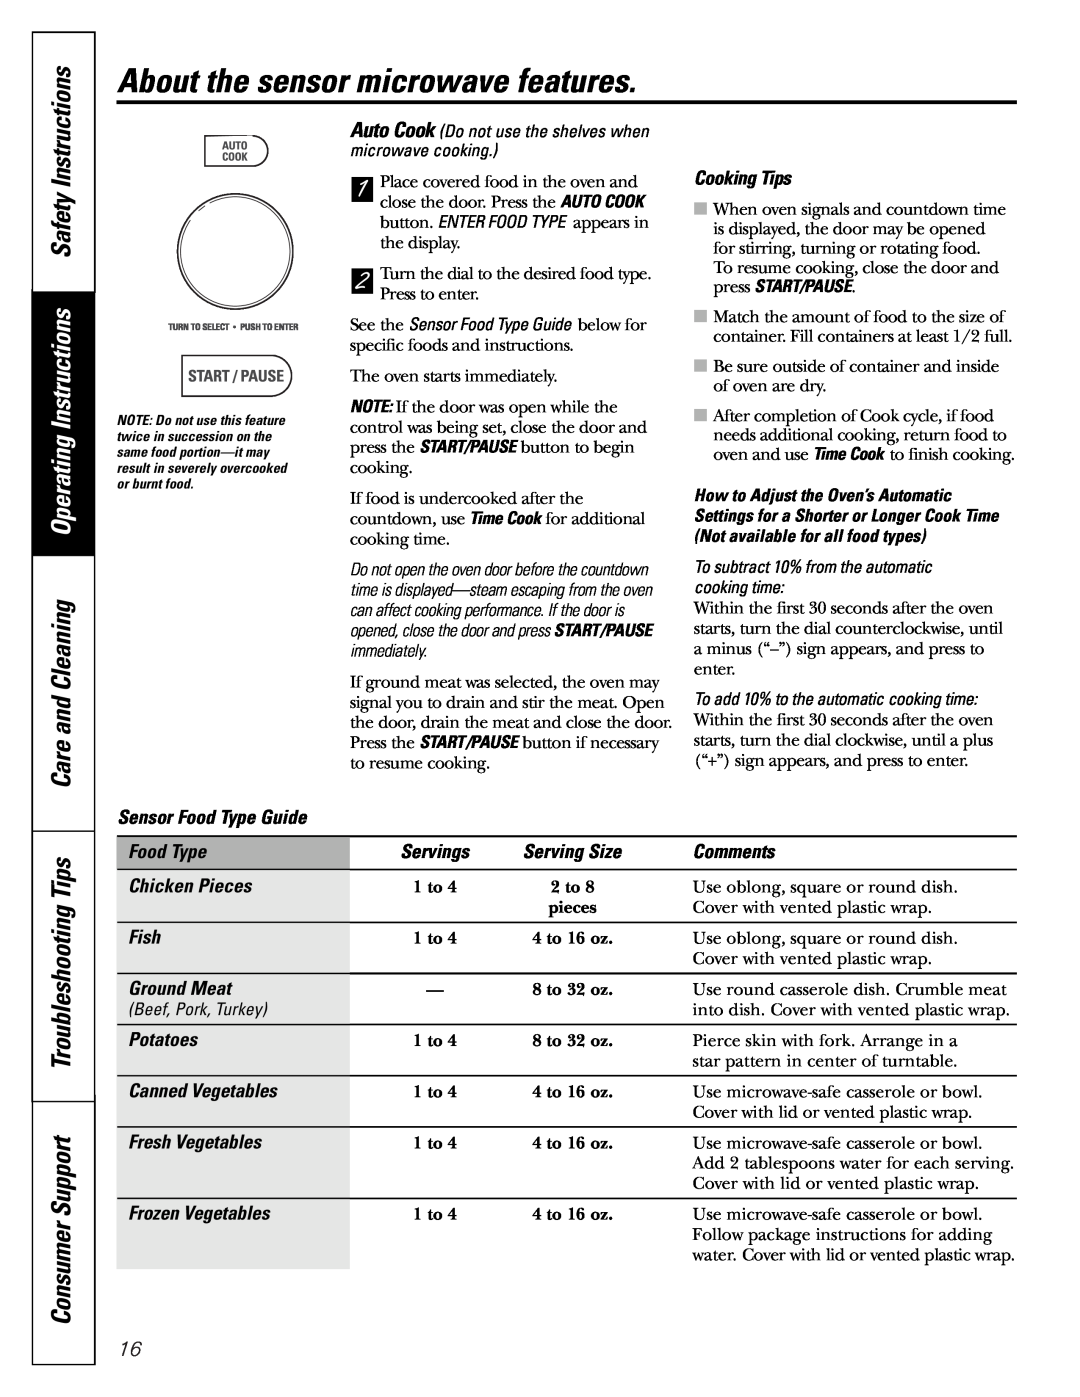 GE JVM1790 owner manual About the sensor microwave features, Consumer Support Troubleshooting Tips, Cooking Tips 